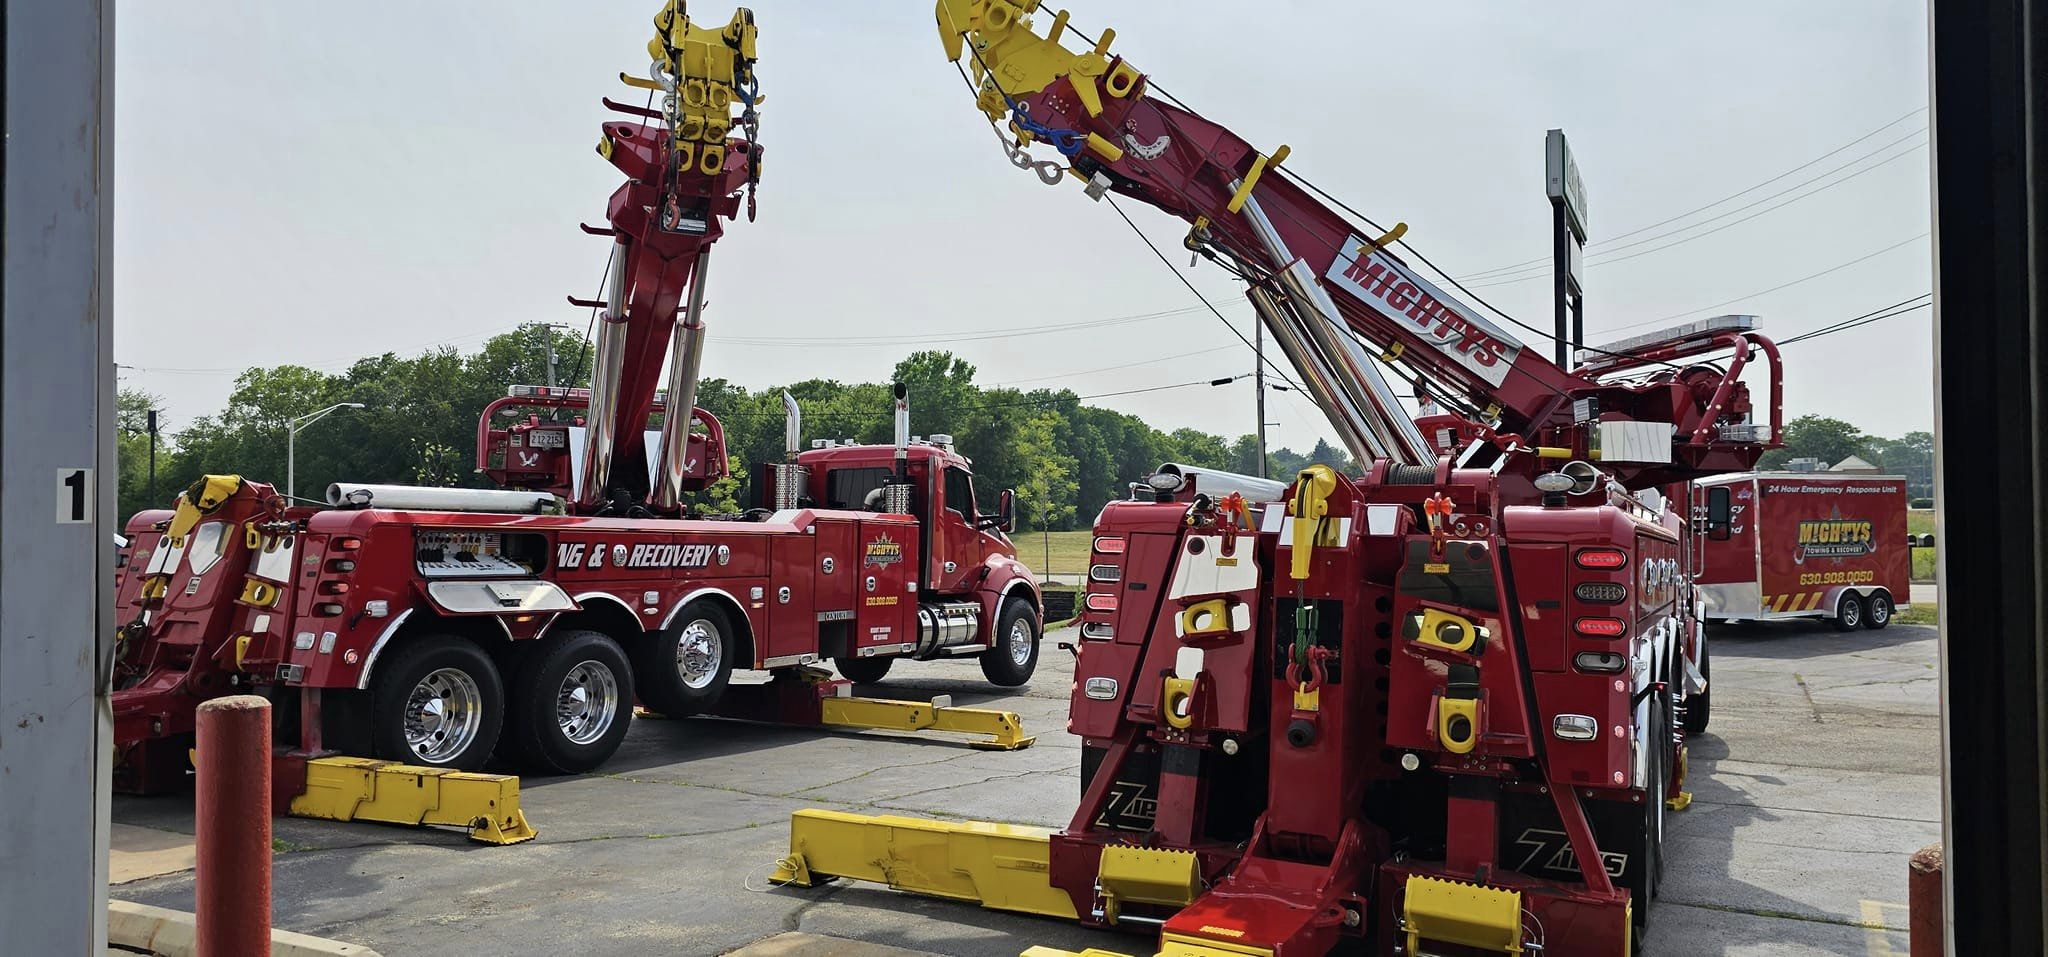 Mighty's towing & recovery inc, channahon, il, plainfield, il, rockdale, il